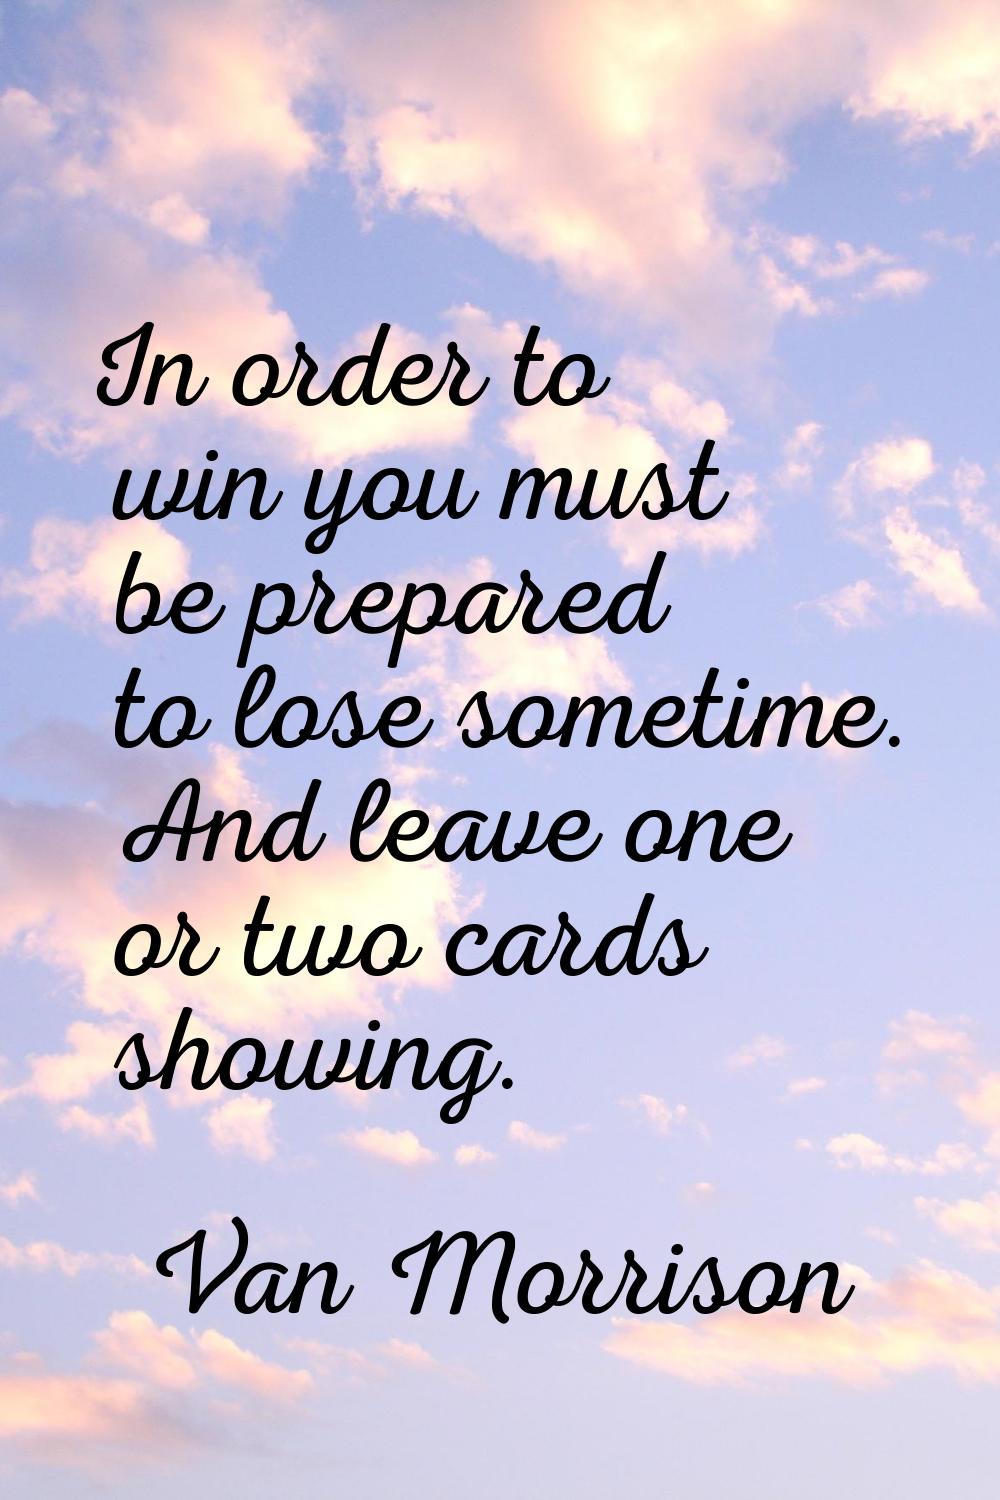 In order to win you must be prepared to lose sometime. And leave one or two cards showing.